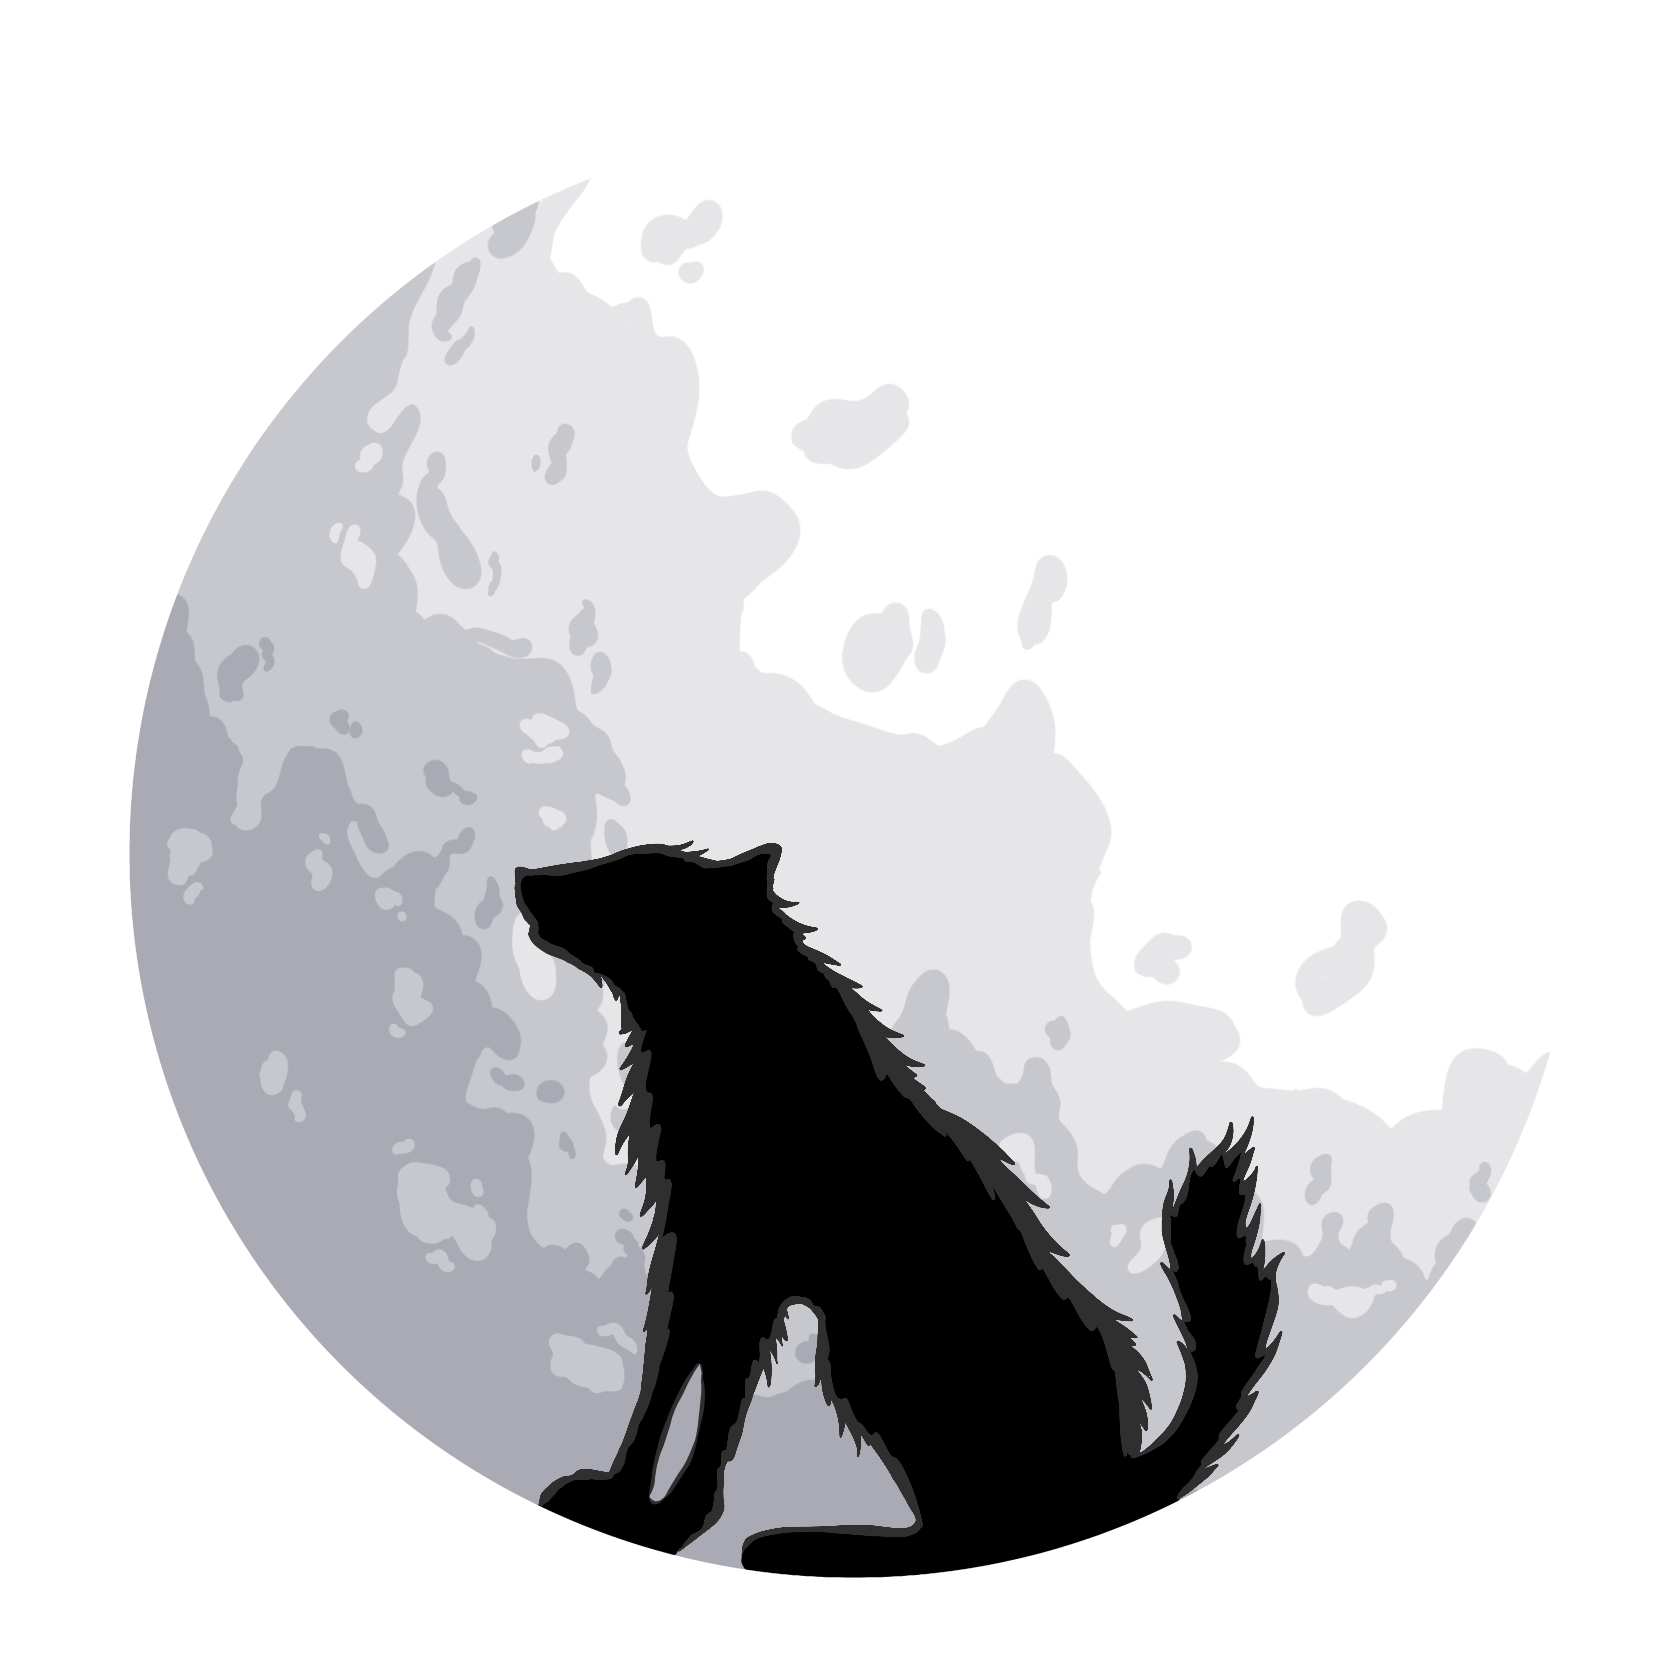 Full Moon Dog Sticker by Russ for iOS & Android | GIPHY